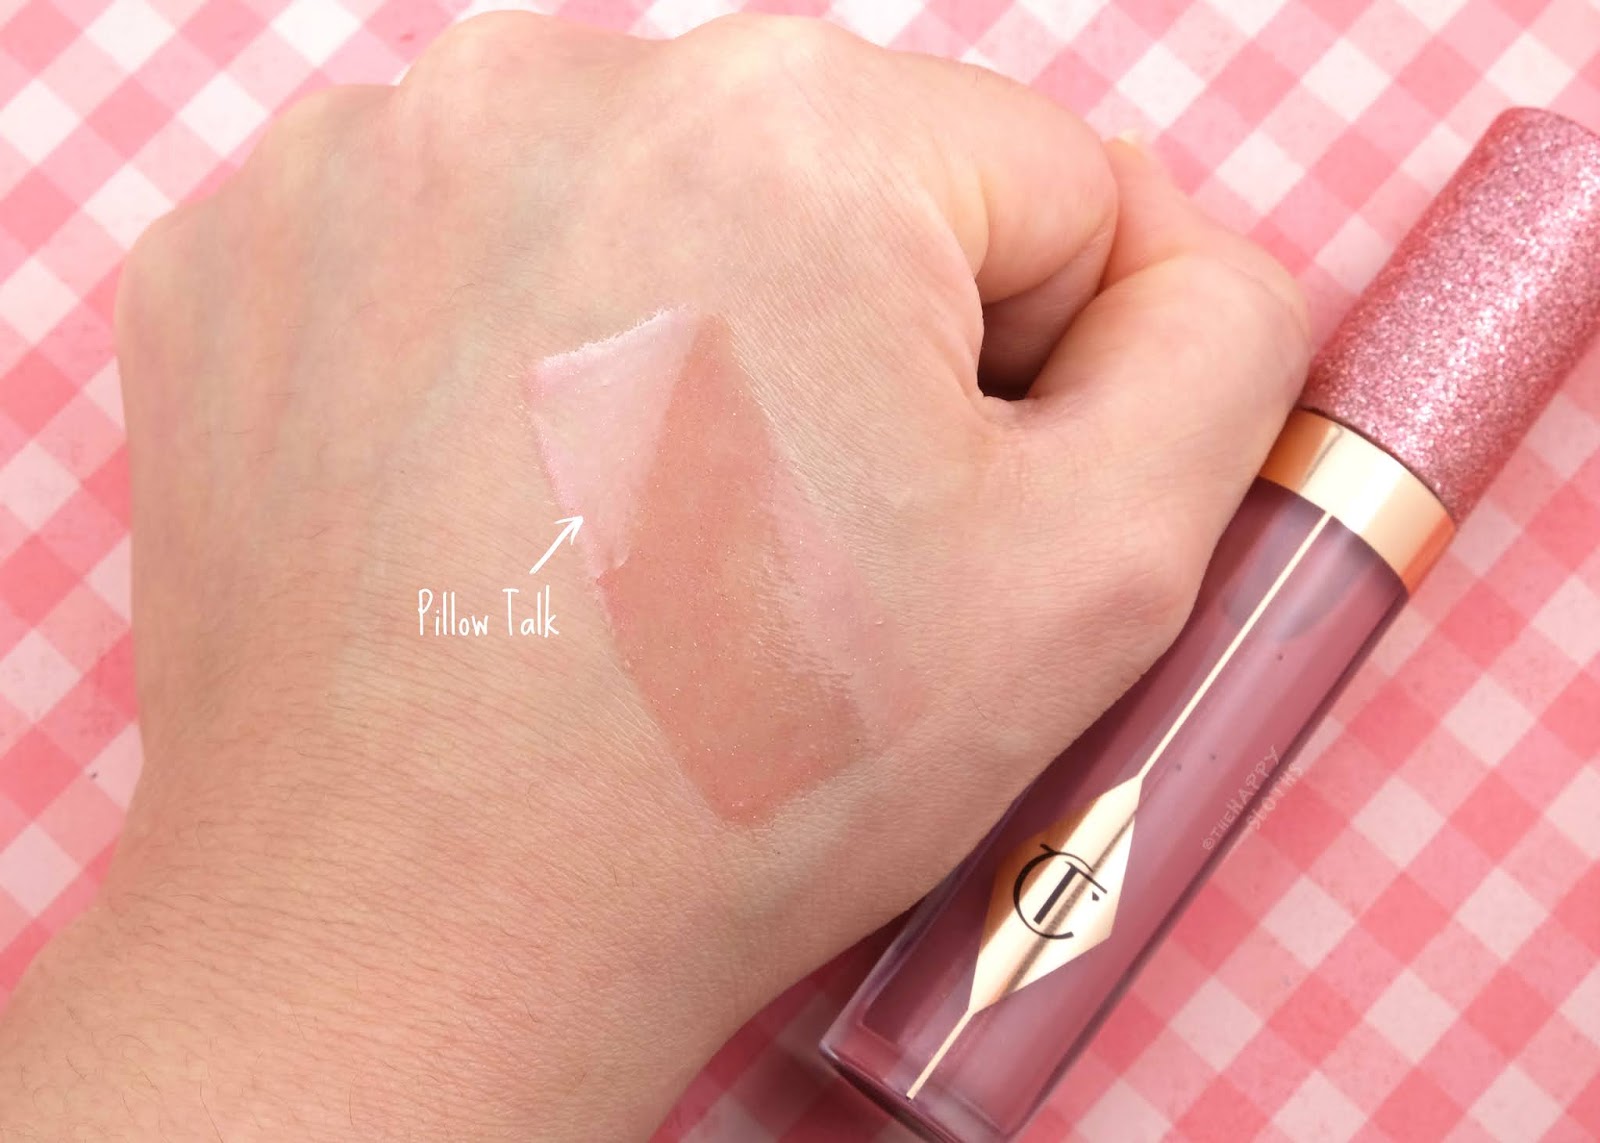 Charlotte Tilbury | "Pillow Talk" Charlotte's Jewel Lips: Review and Swatches